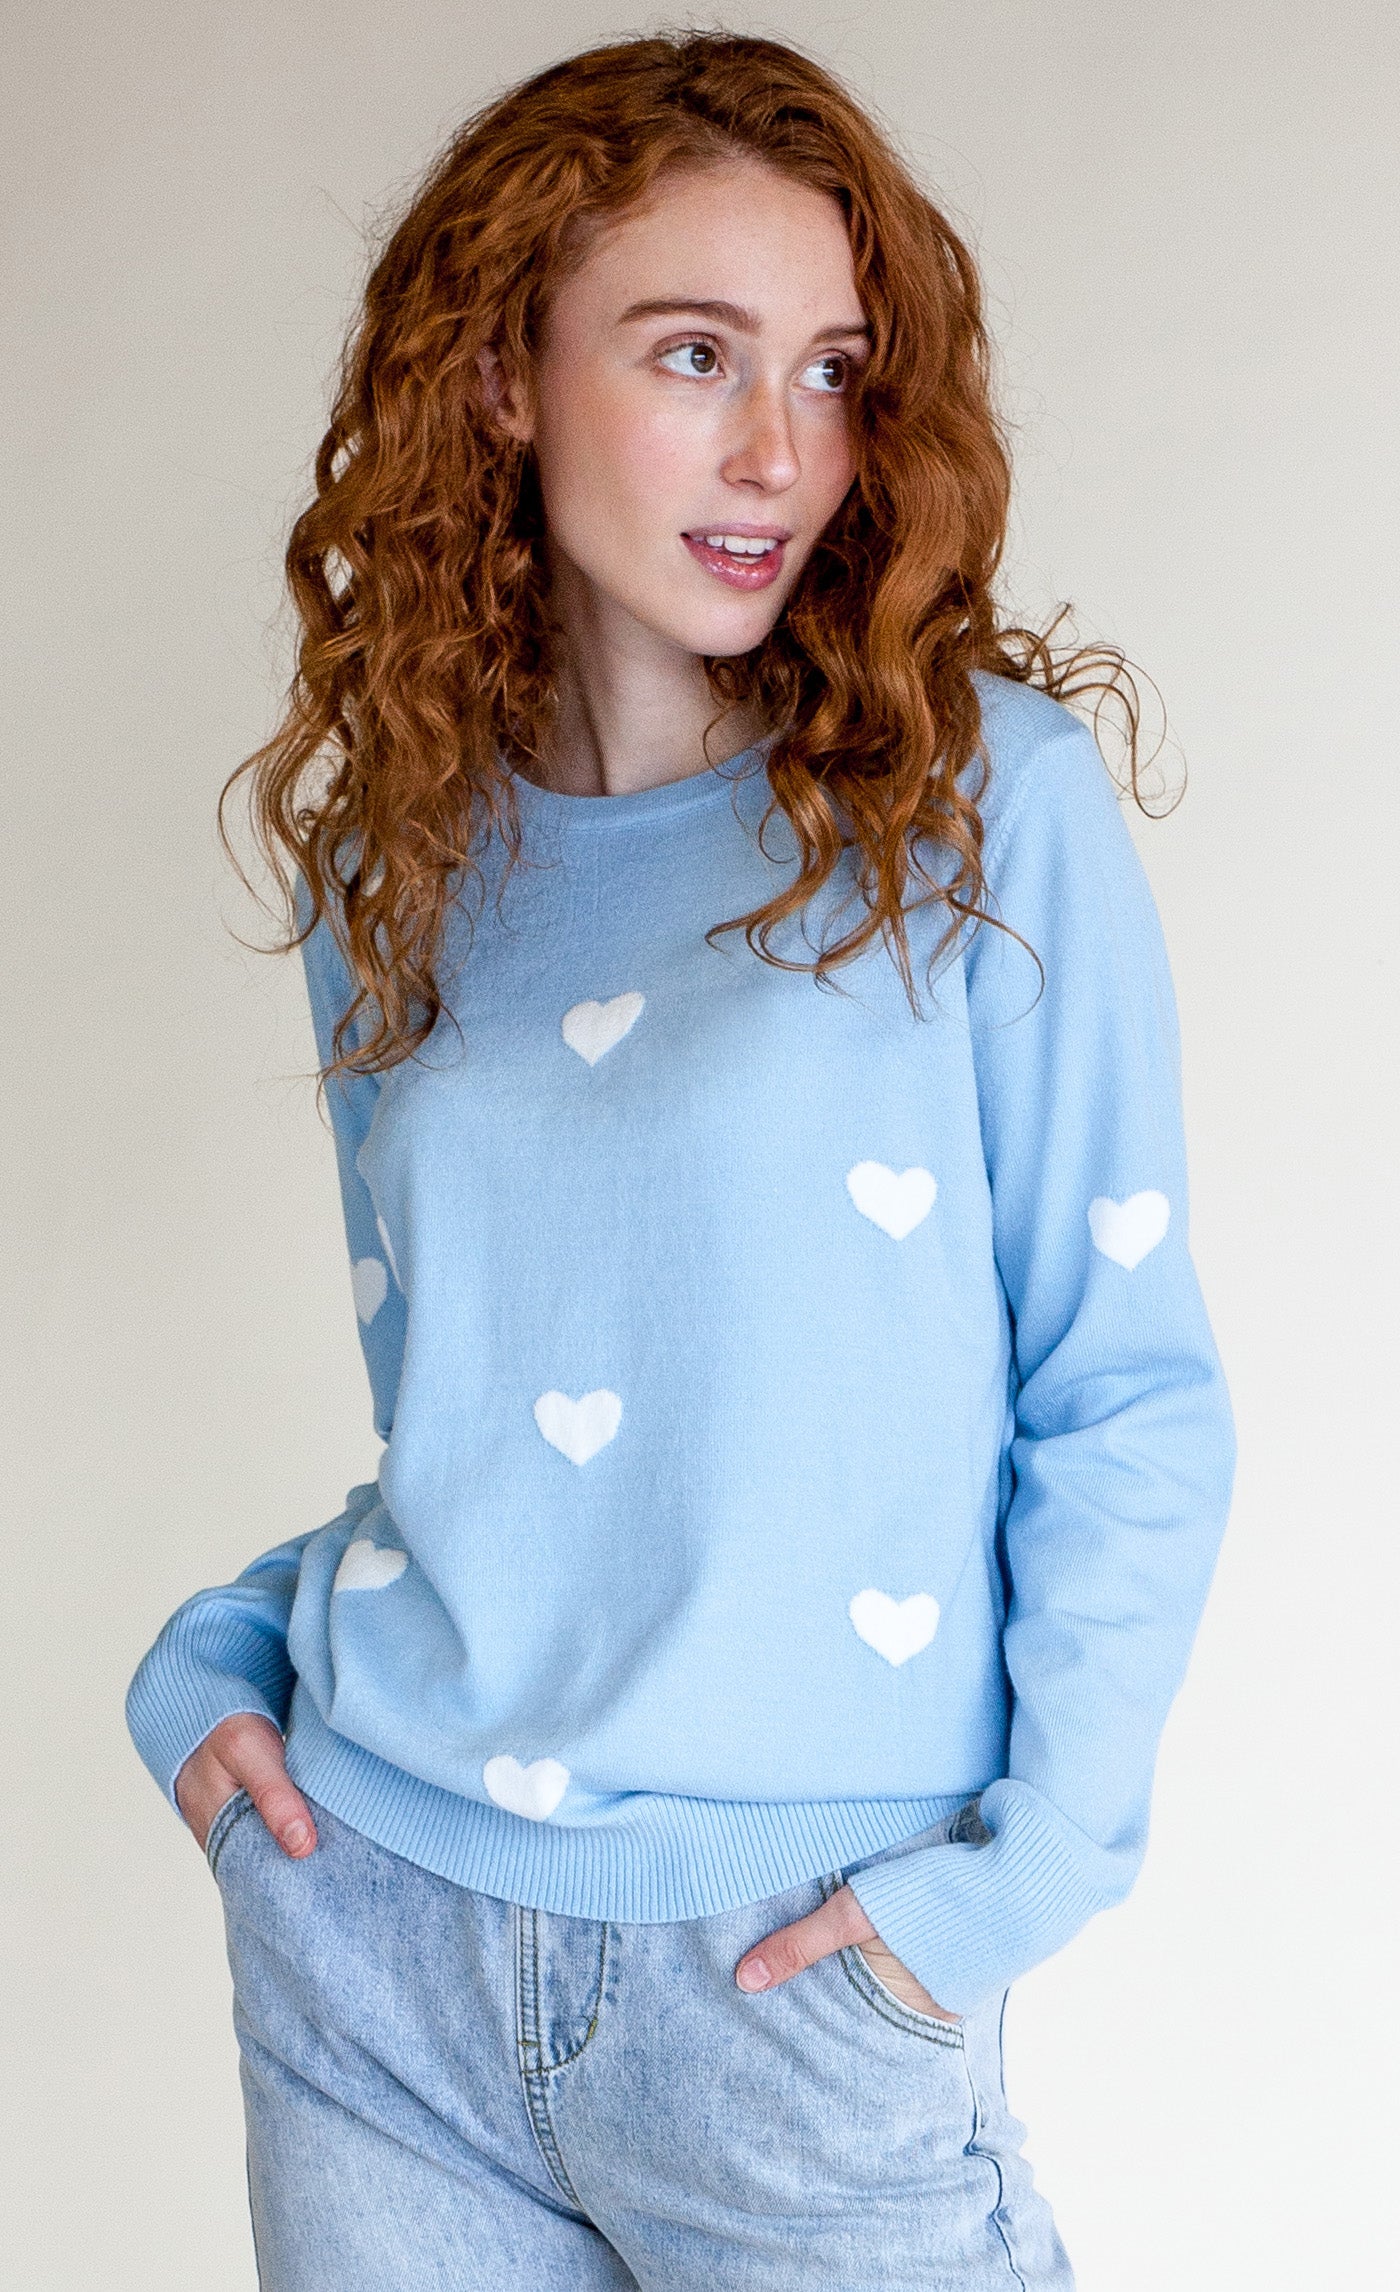 Tinsel Heart Sweater, White - New Arrivals - The Blue Door Boutique